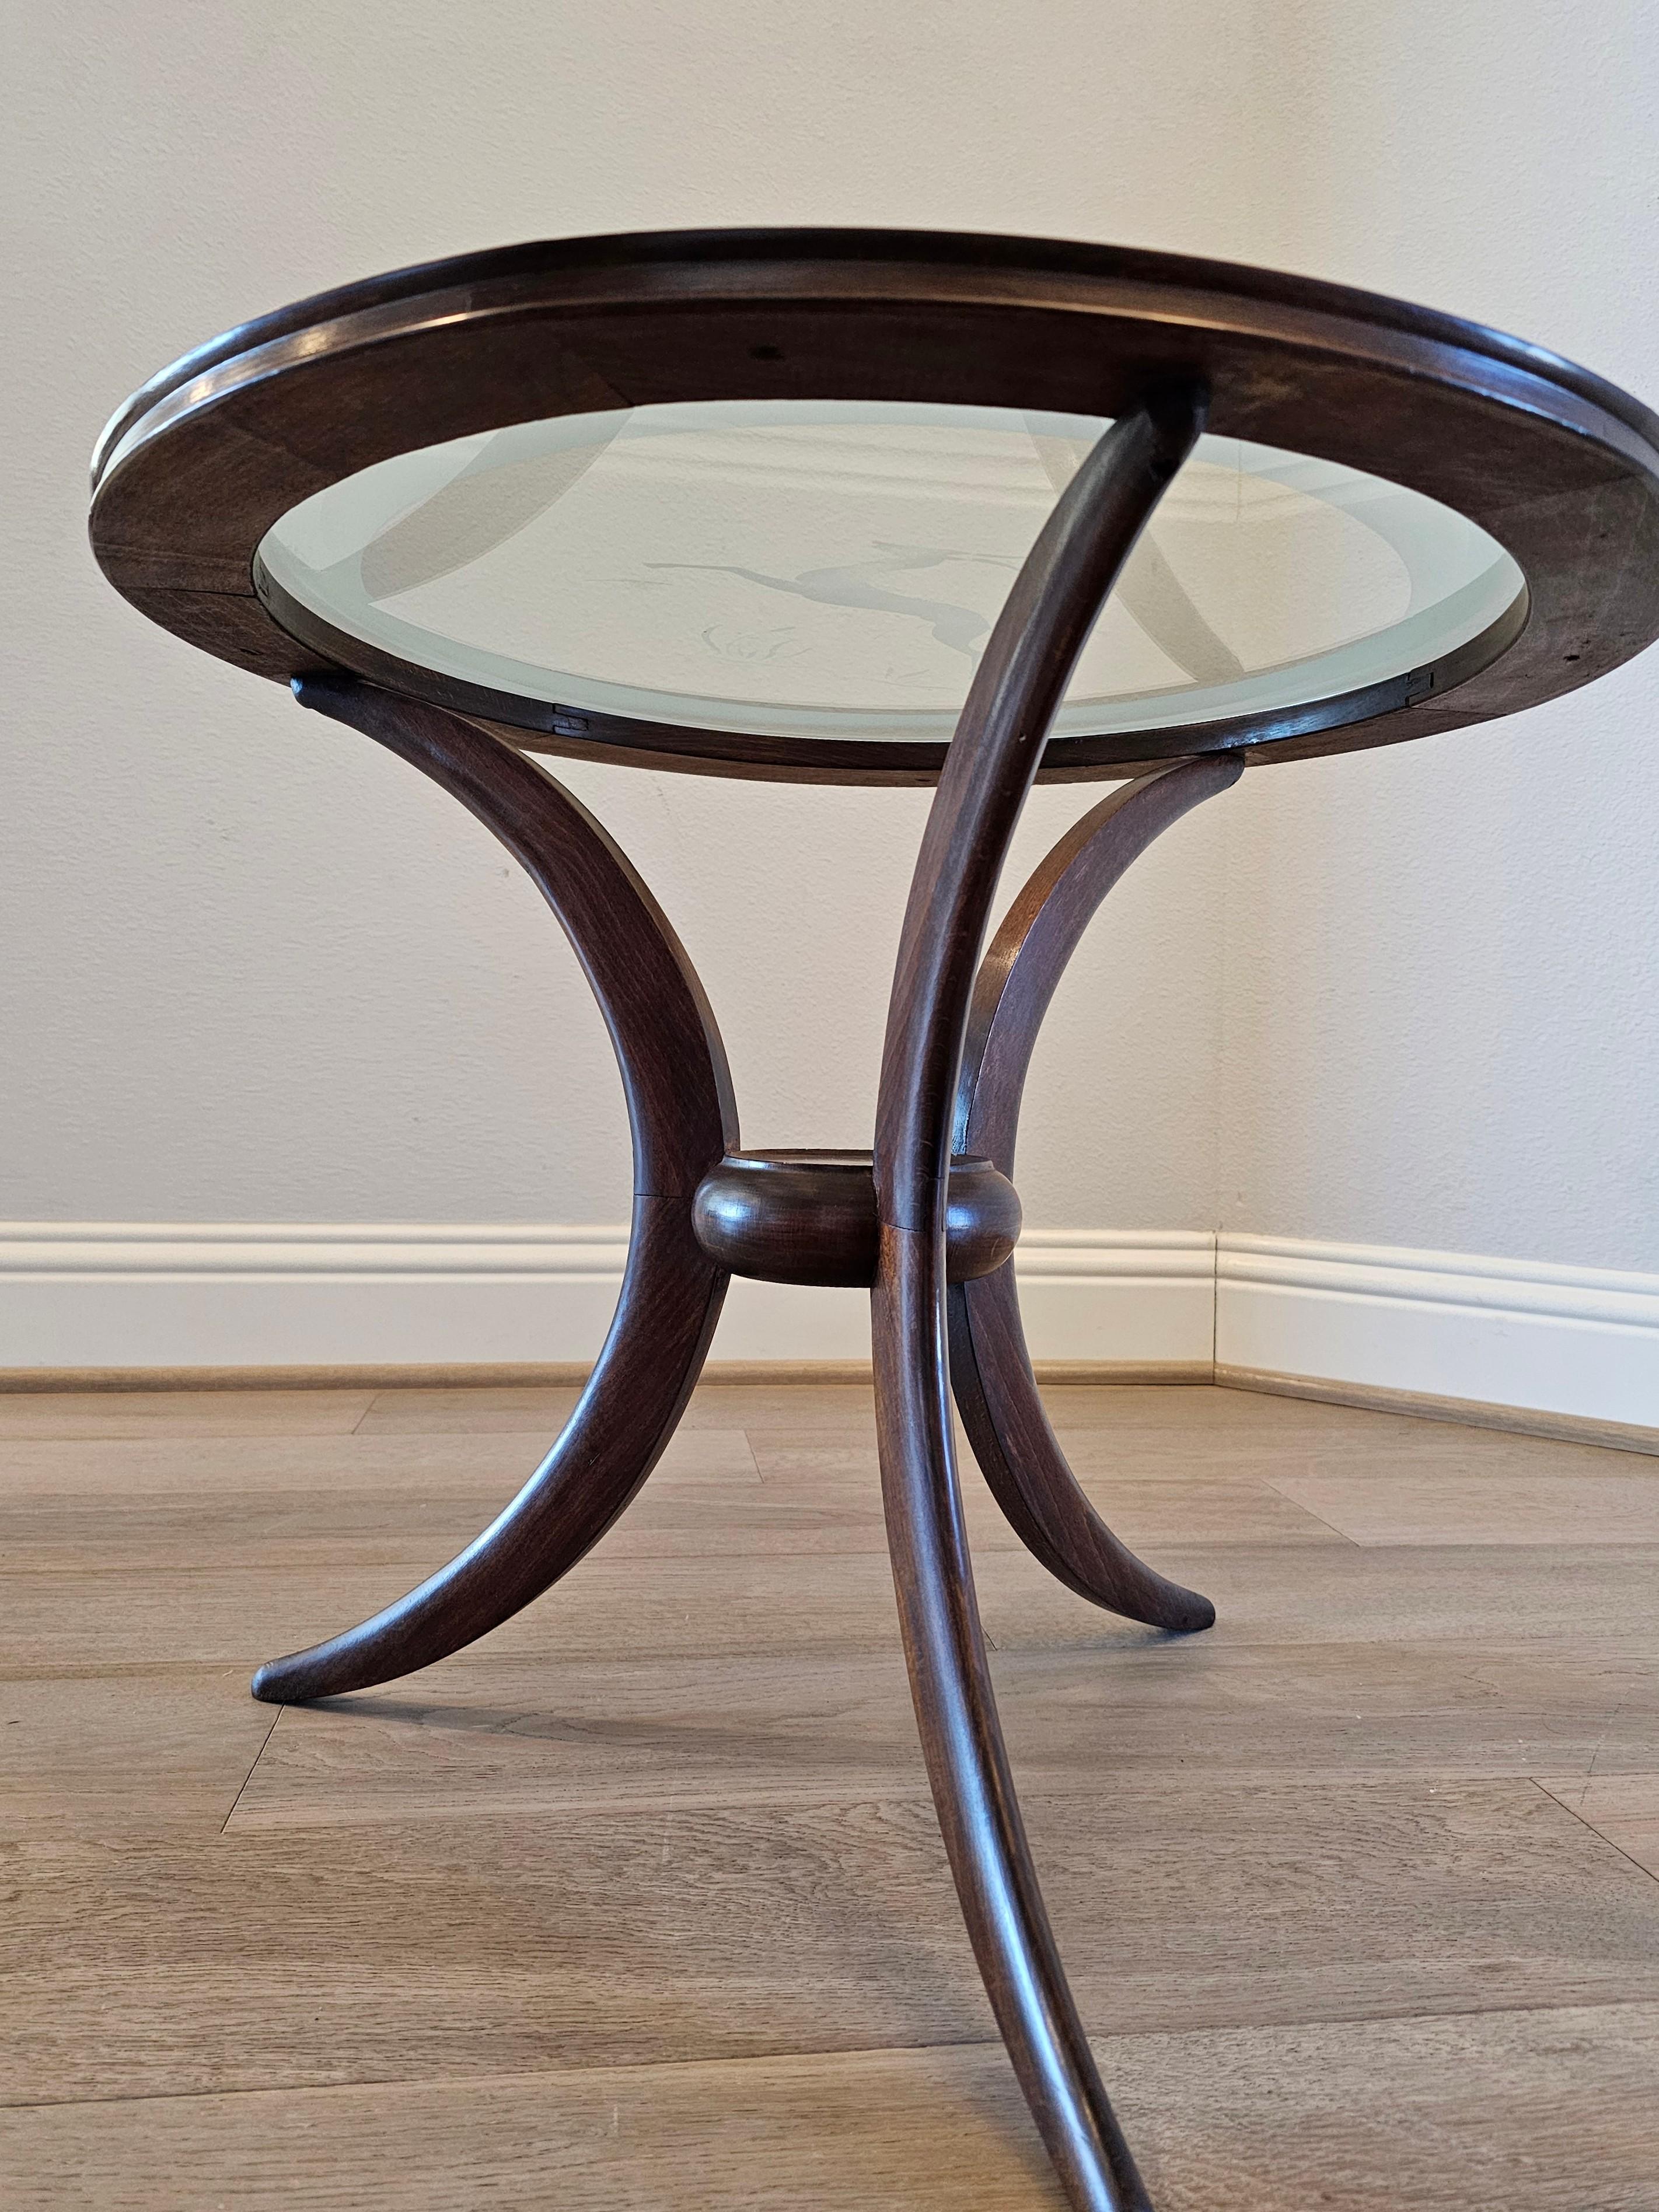 1940s Italian Mid-Century Modern Round Etched Glass Side Table  For Sale 6